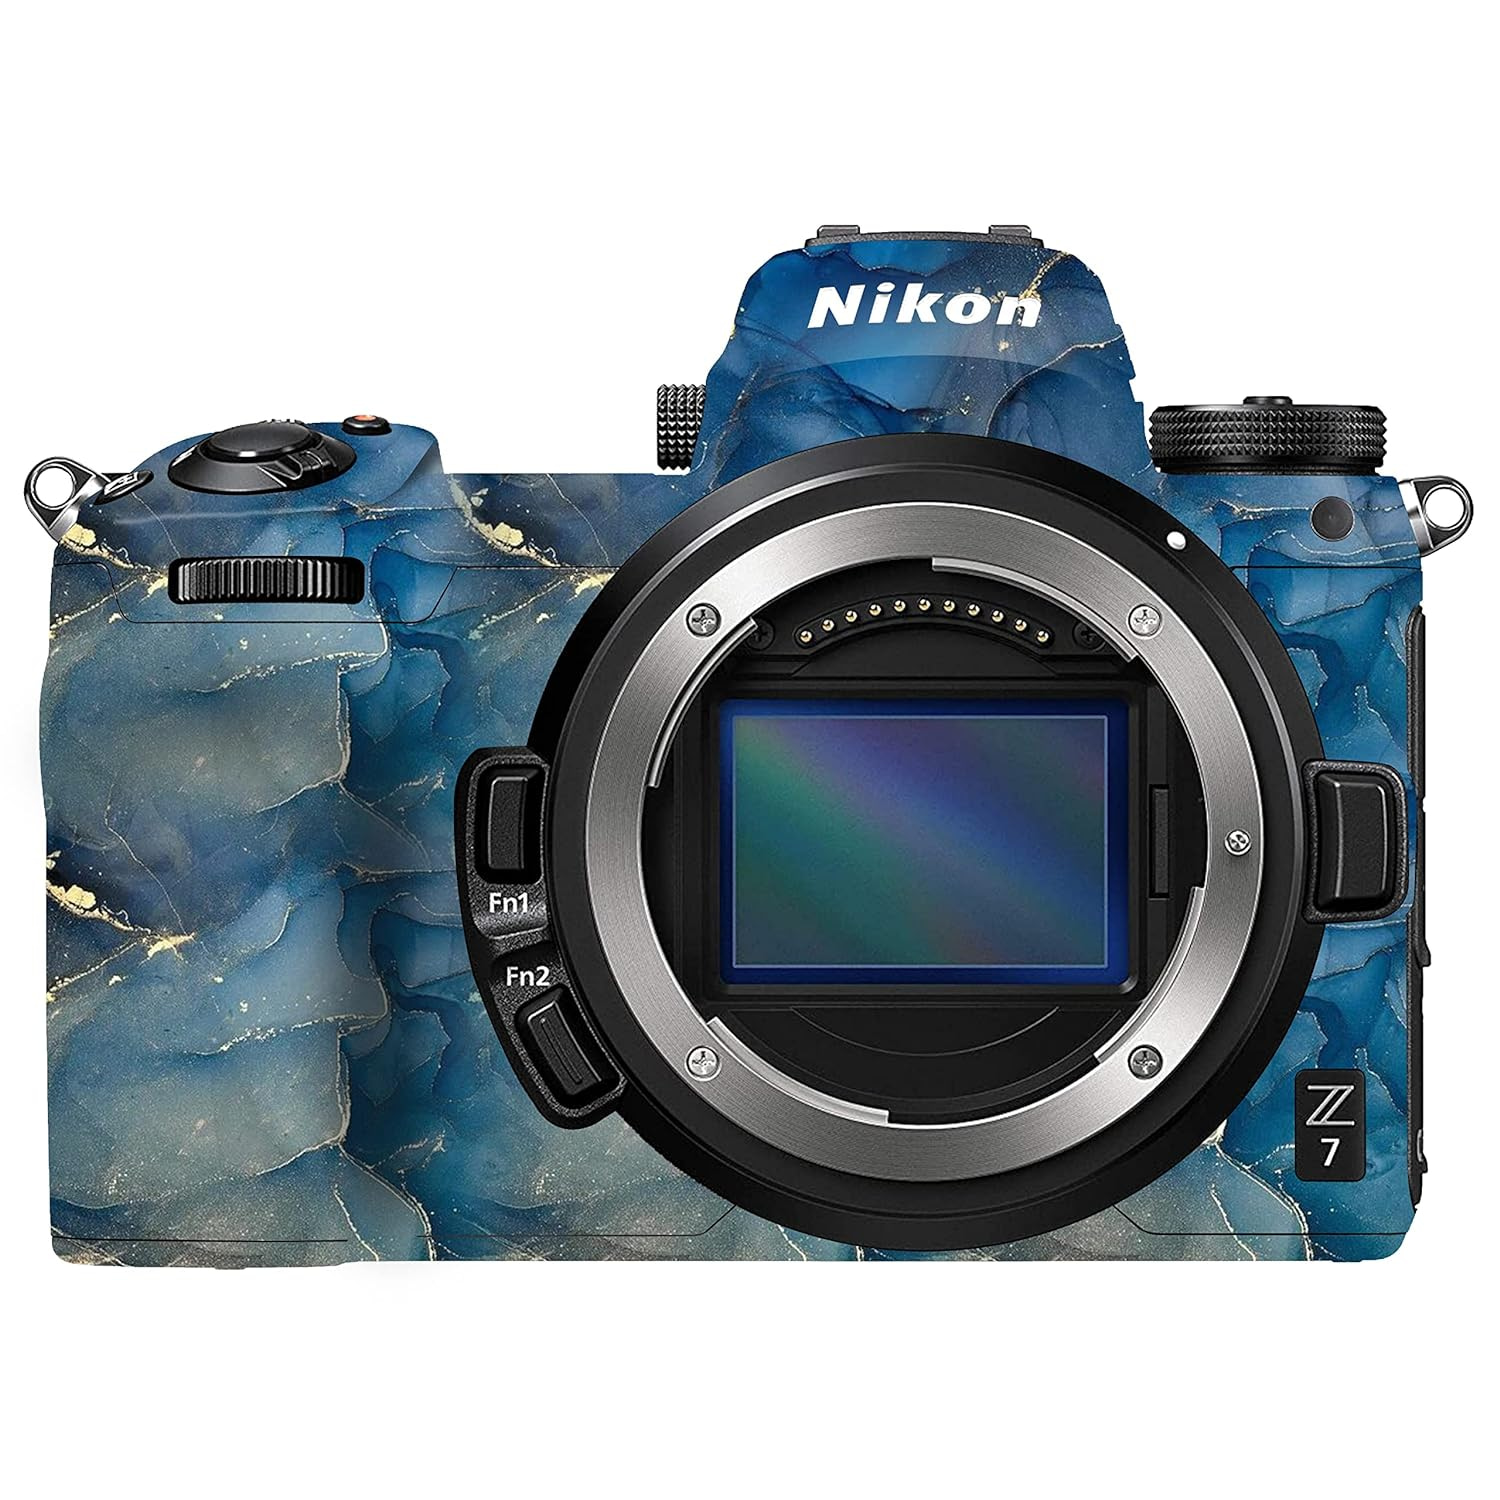 Read more about the article WRAPTURE. Premium DSLR Camera Scratchproof Protective Skin for Nikon Z7 – No Residue Removal, Bubble Free, Scratch Resistant, Stretchable, HD Quality Printed – HDCS-NIKZ7-061